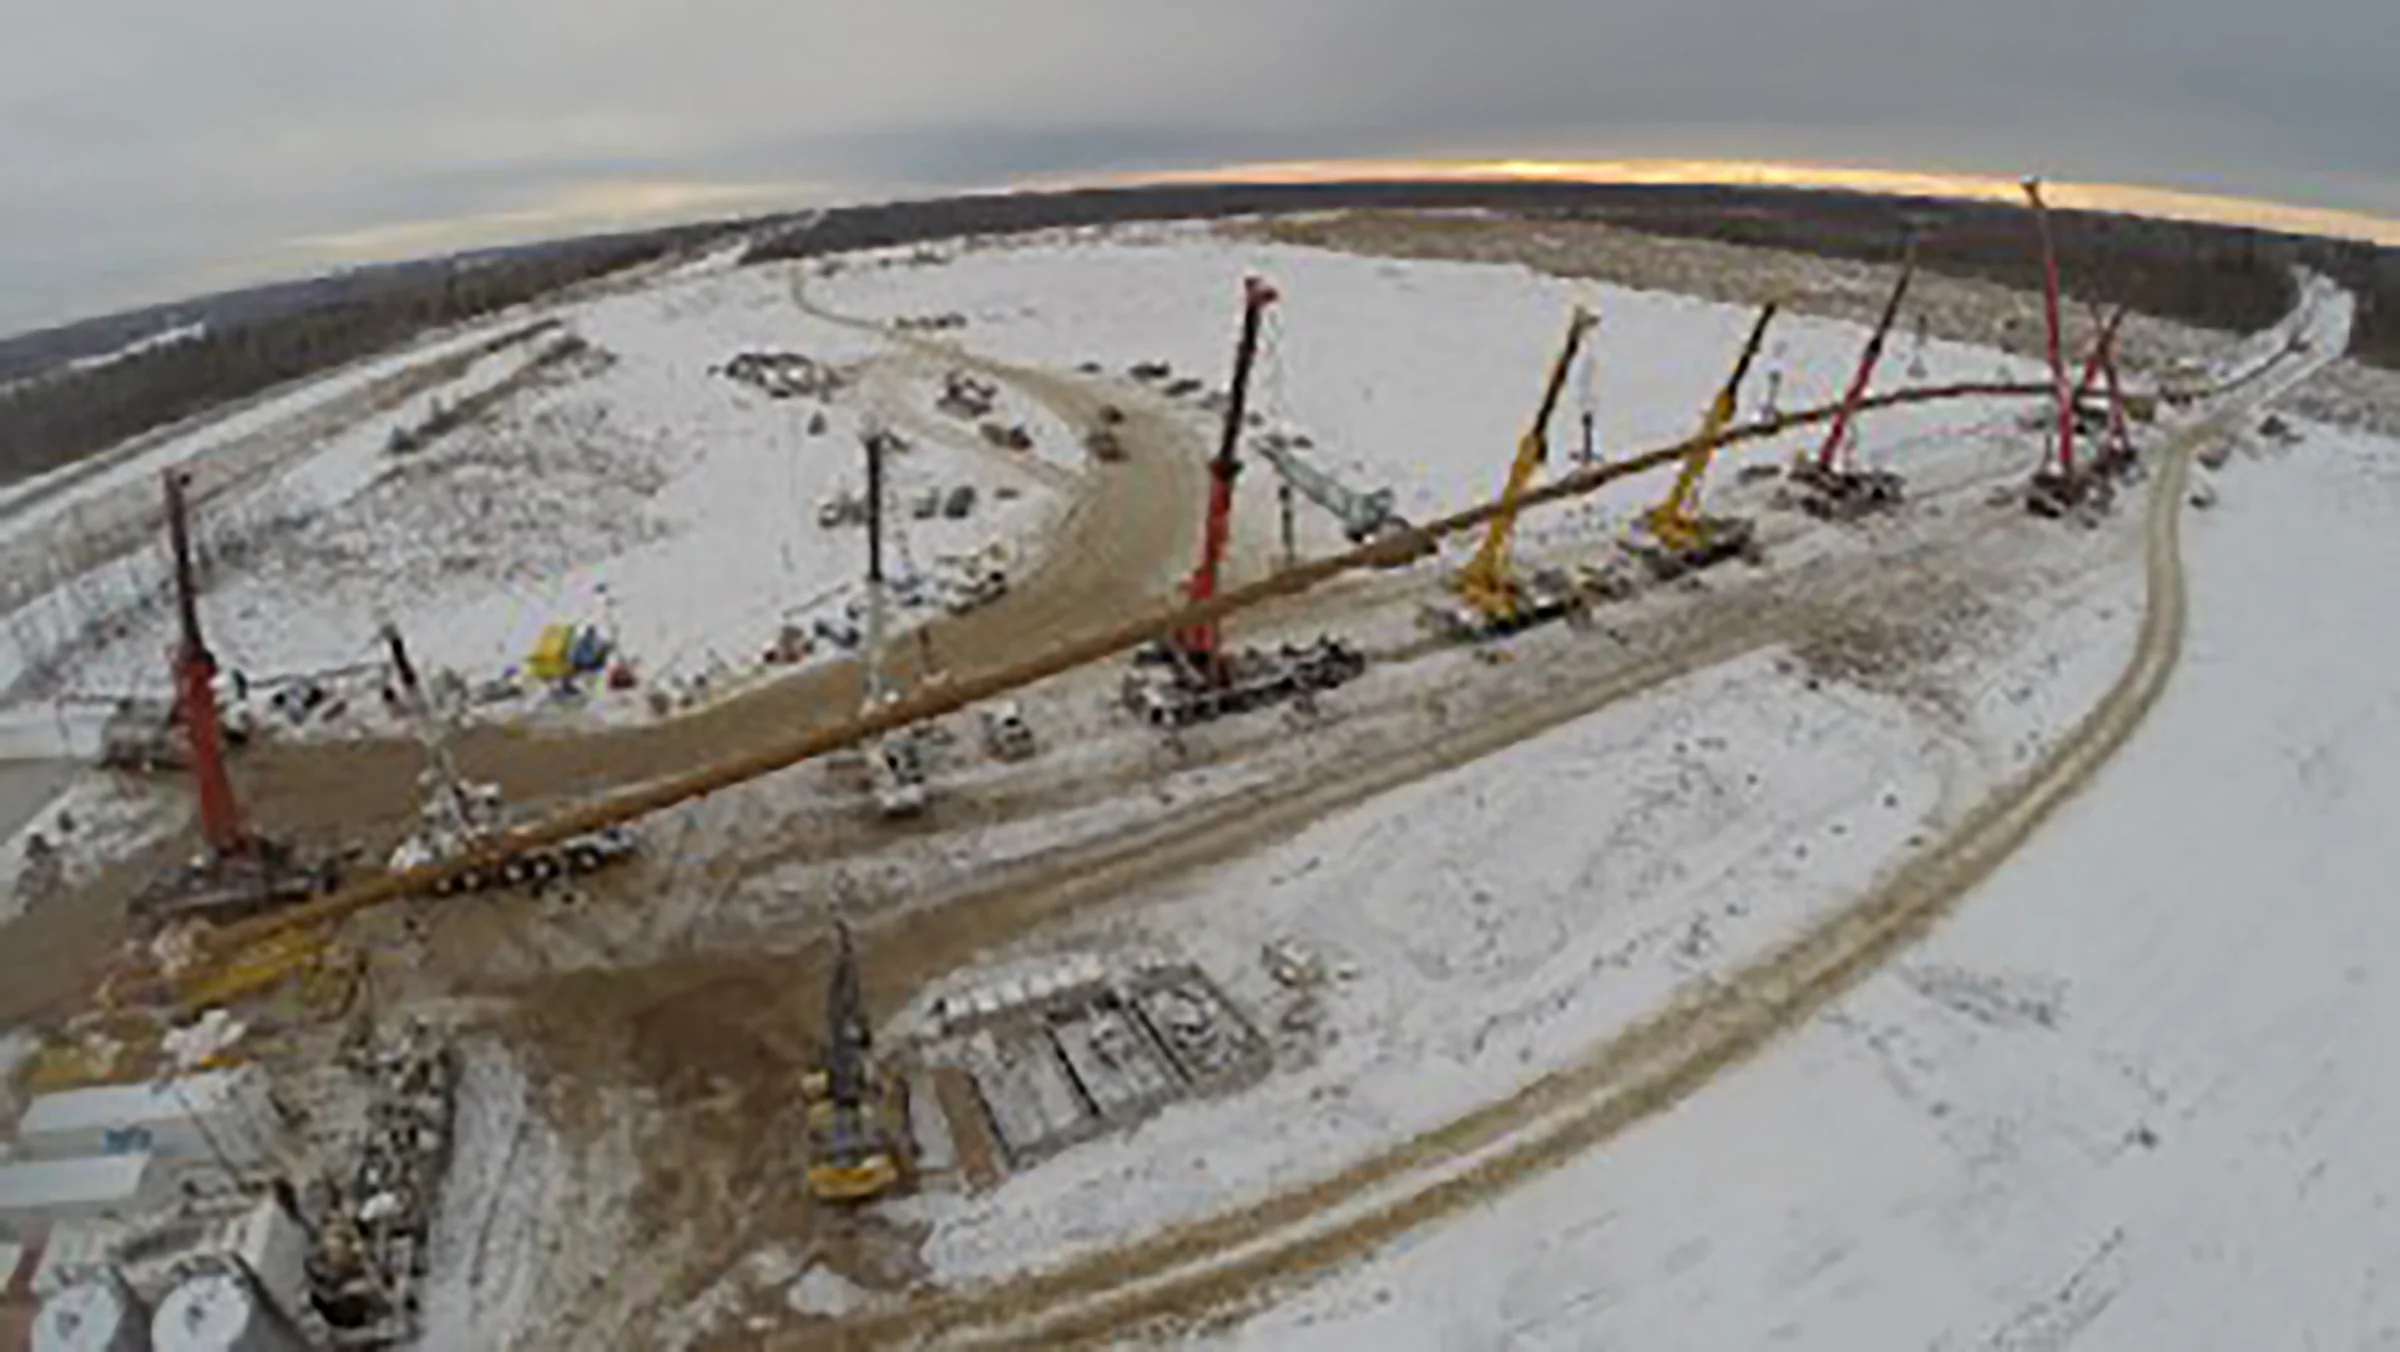 Large cranes hold a long, large diameter pipe in a snowy environment.